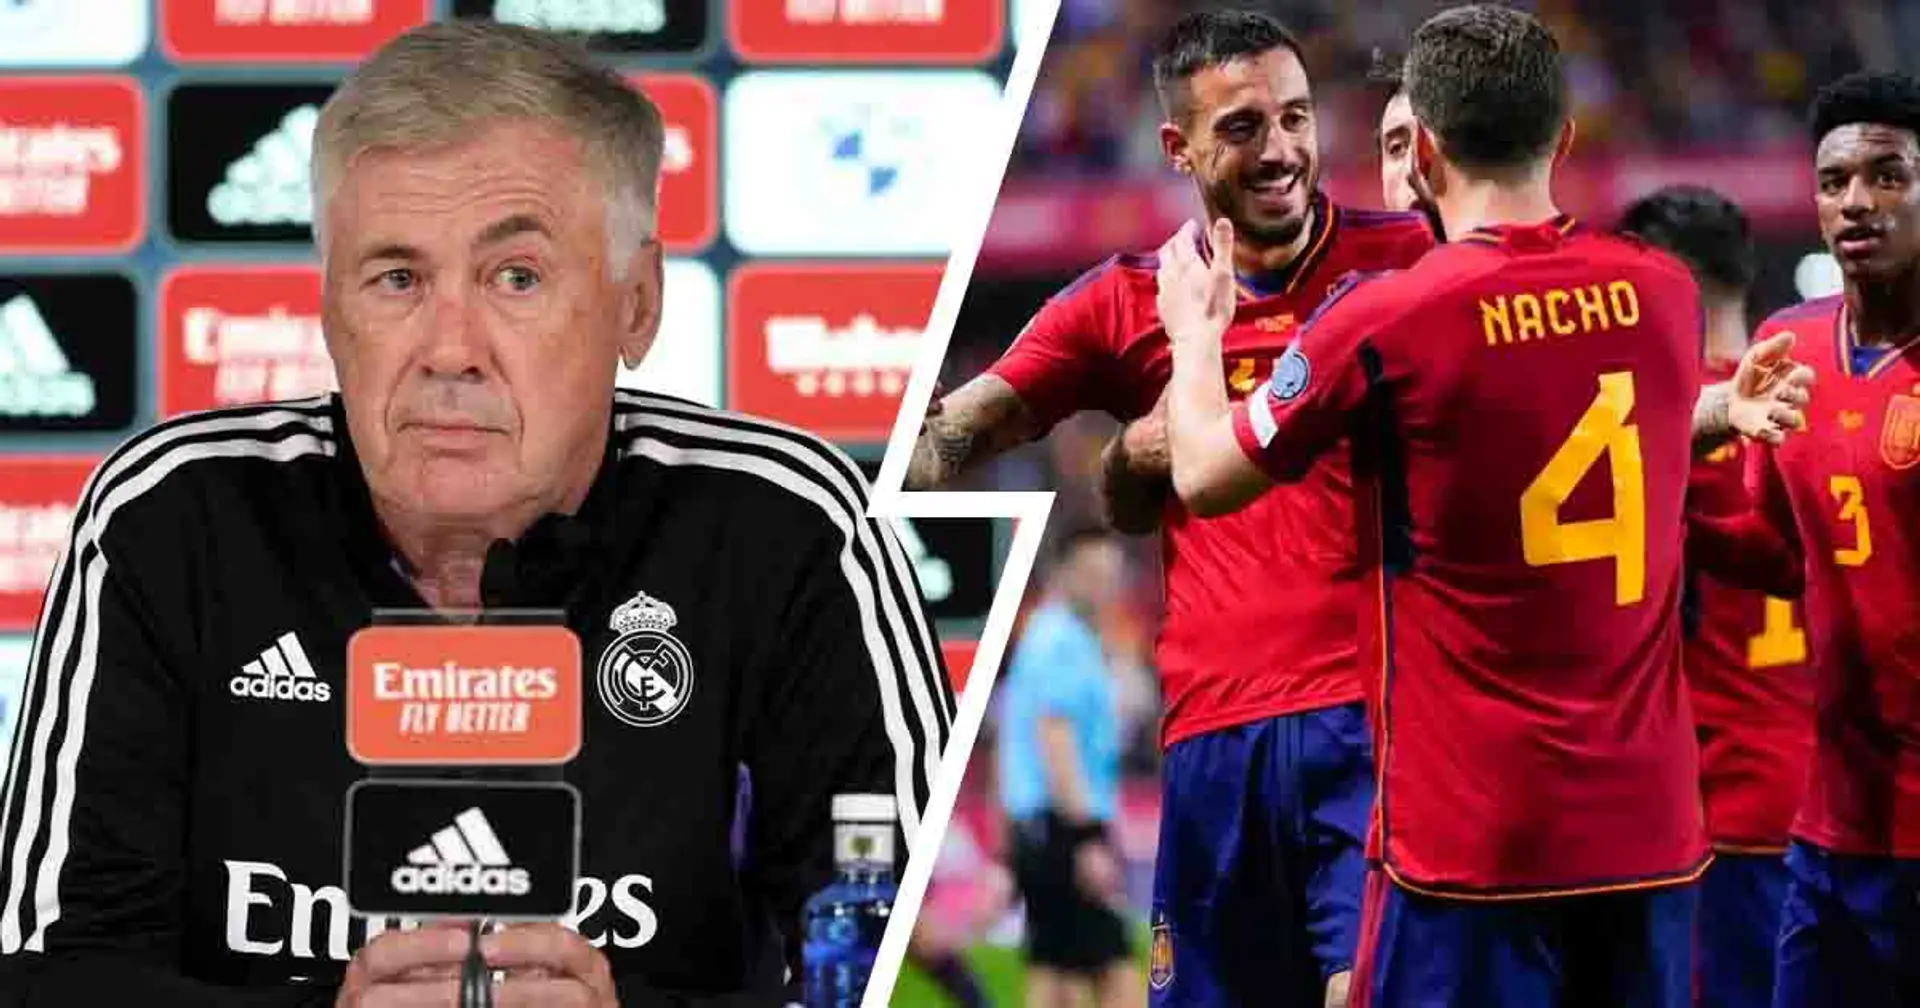 'We'll work on it': Ancelotti confirms search for new striker in summer window, namedrops three forwards